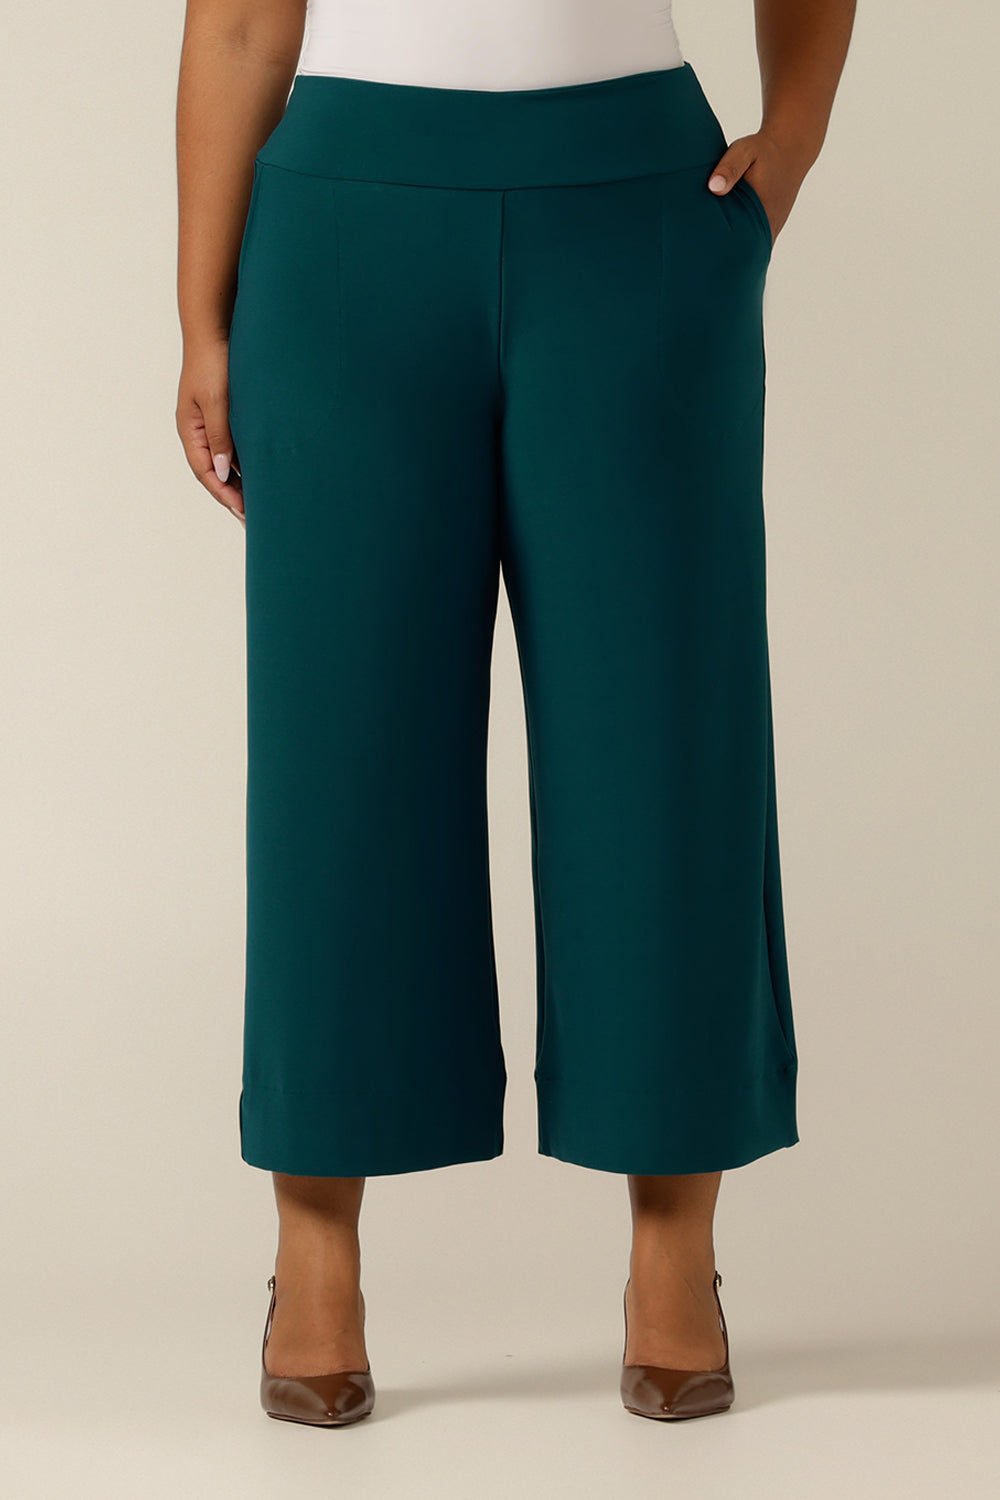 Made in Australia, the featured pants are Petrol green wide-leg culotte's for women in a size 18. A pull-on pant style, these cropped-length women's trousers made in stretch jersey for comfortable work wear and are available in sizes 8 to 24. 